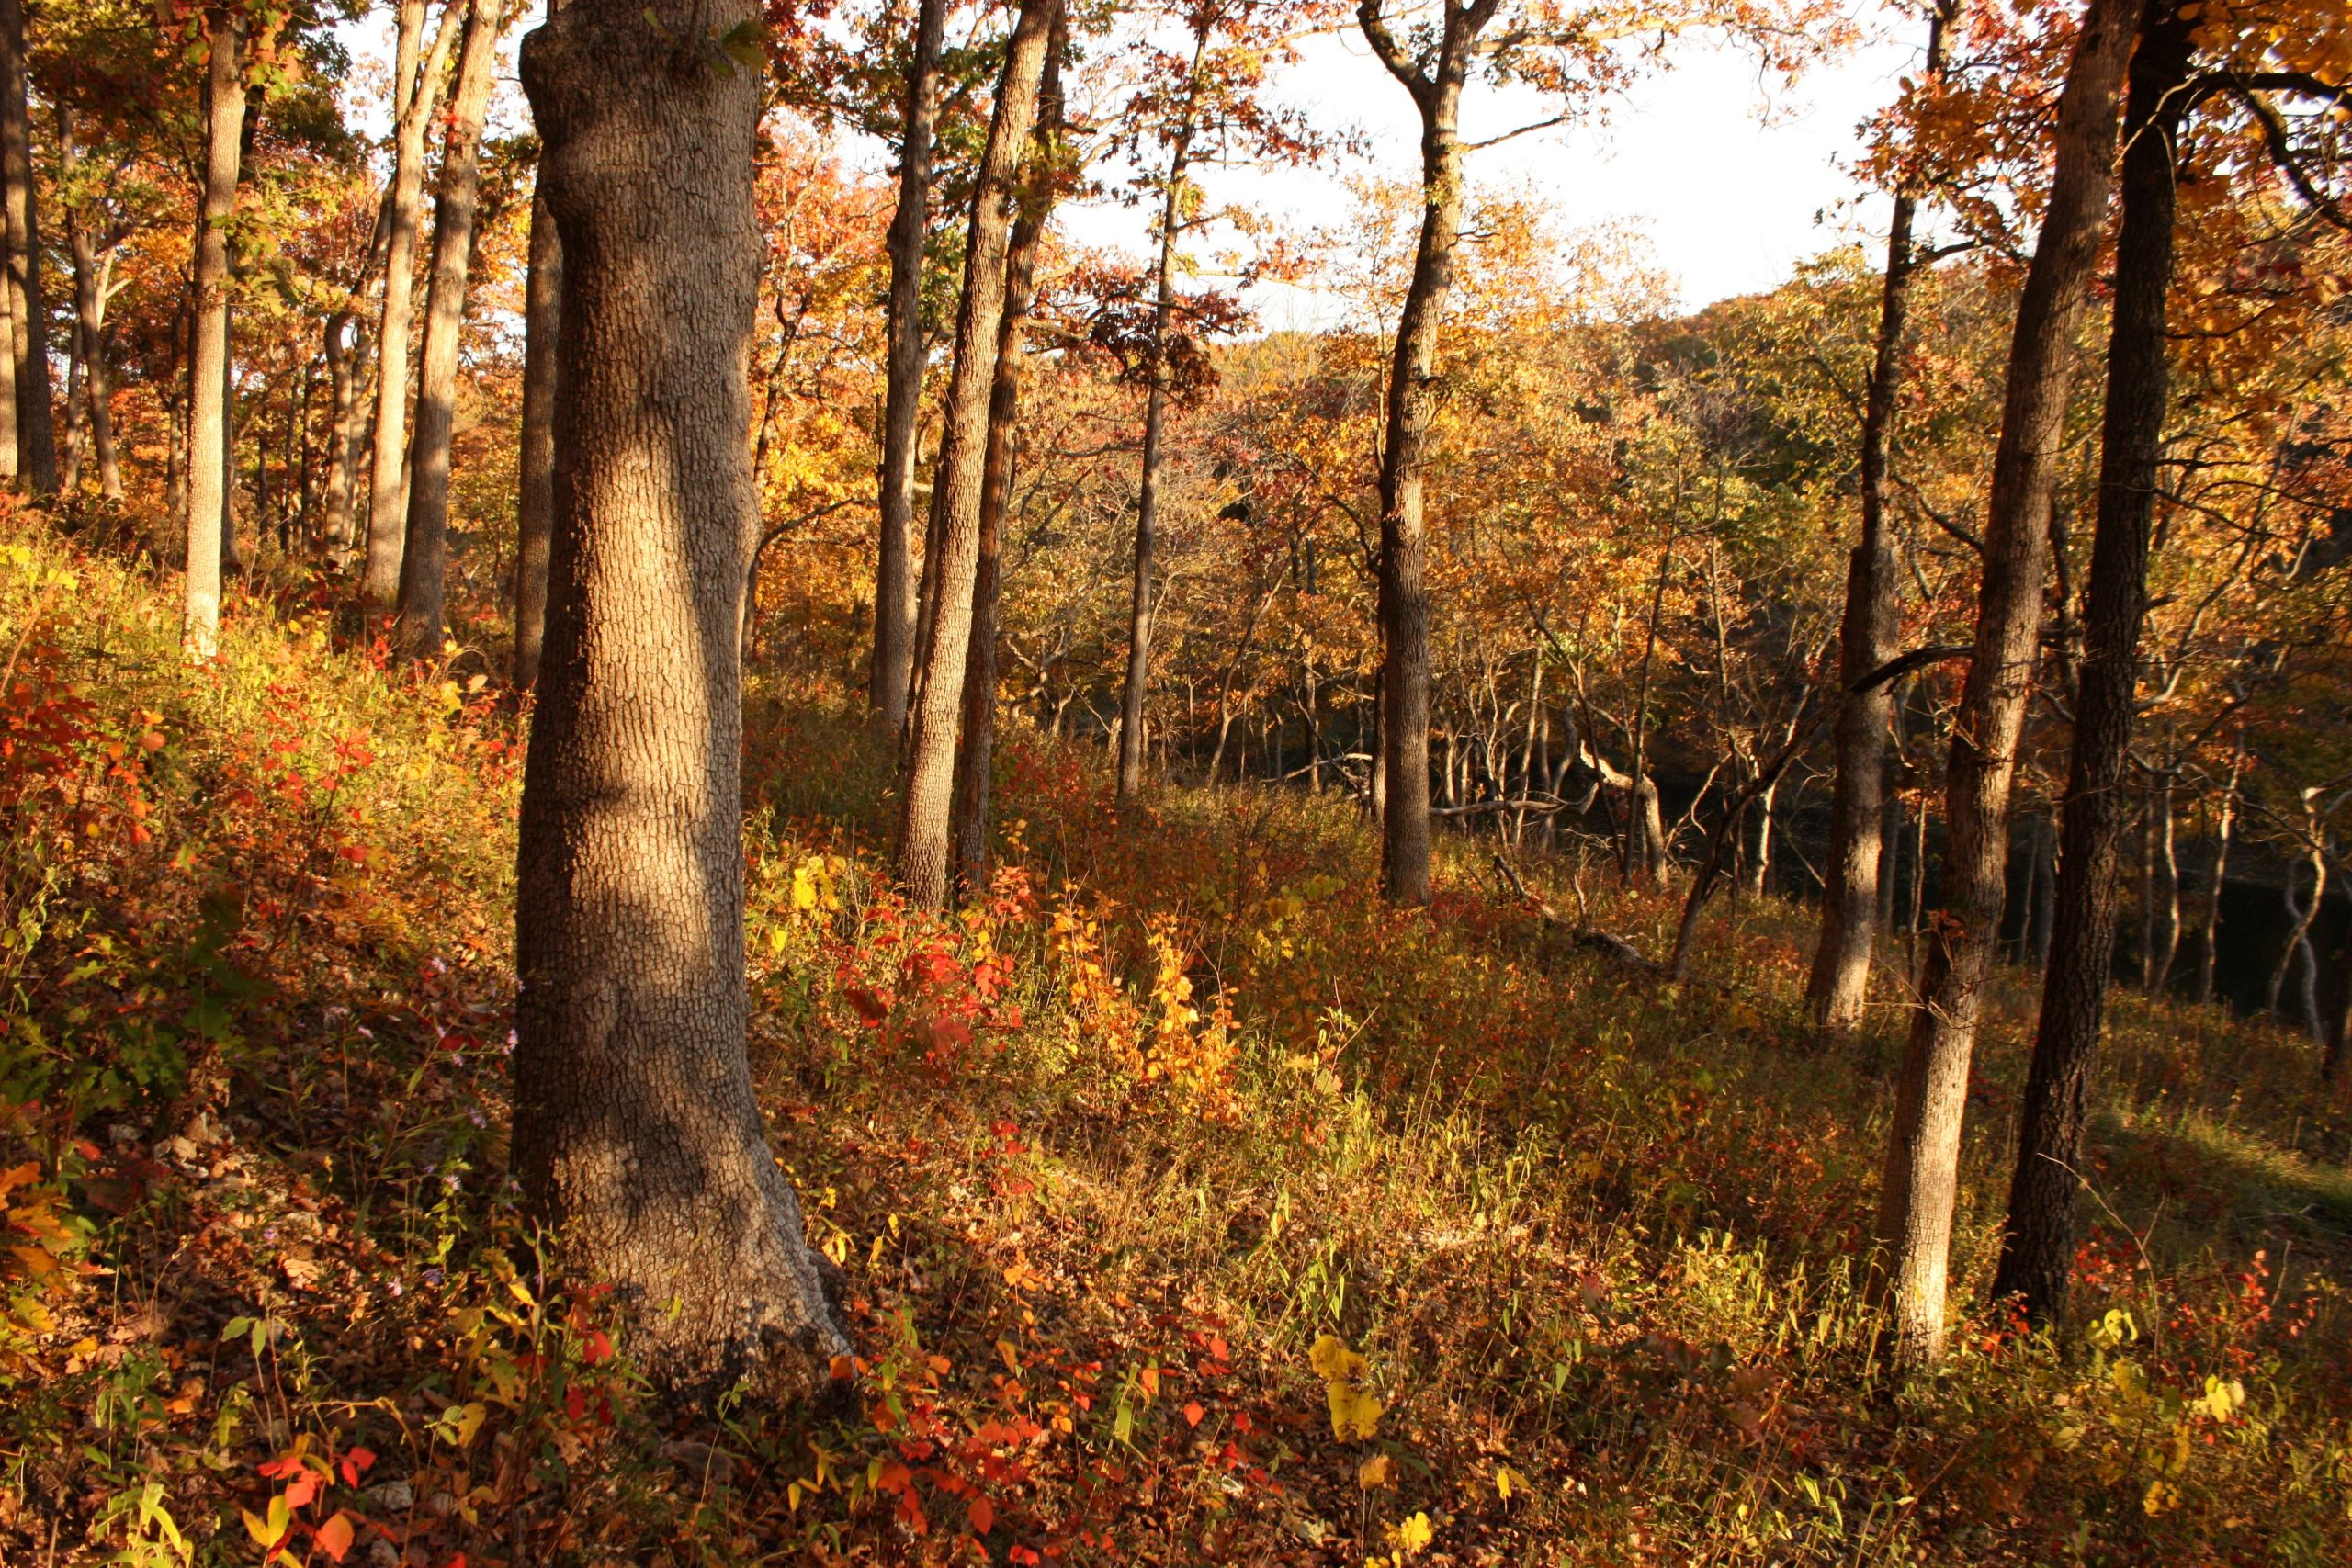 Missouri woodland in the fall with orange and brown leaves